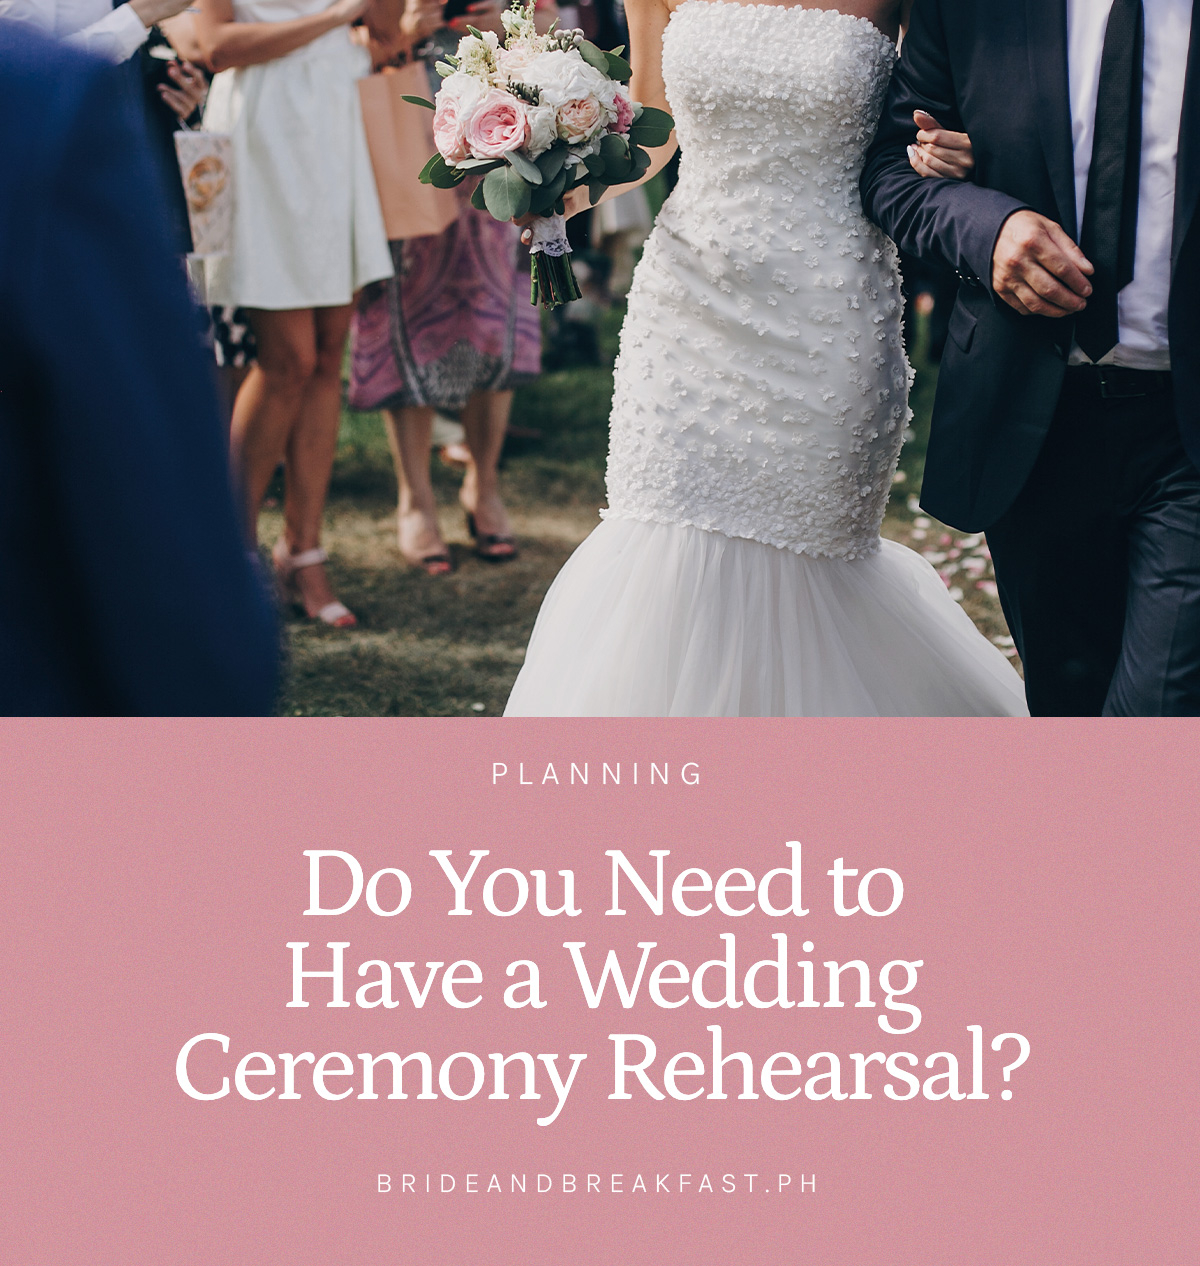 Do You Need to Have a Wedding Ceremony Rehearsal?